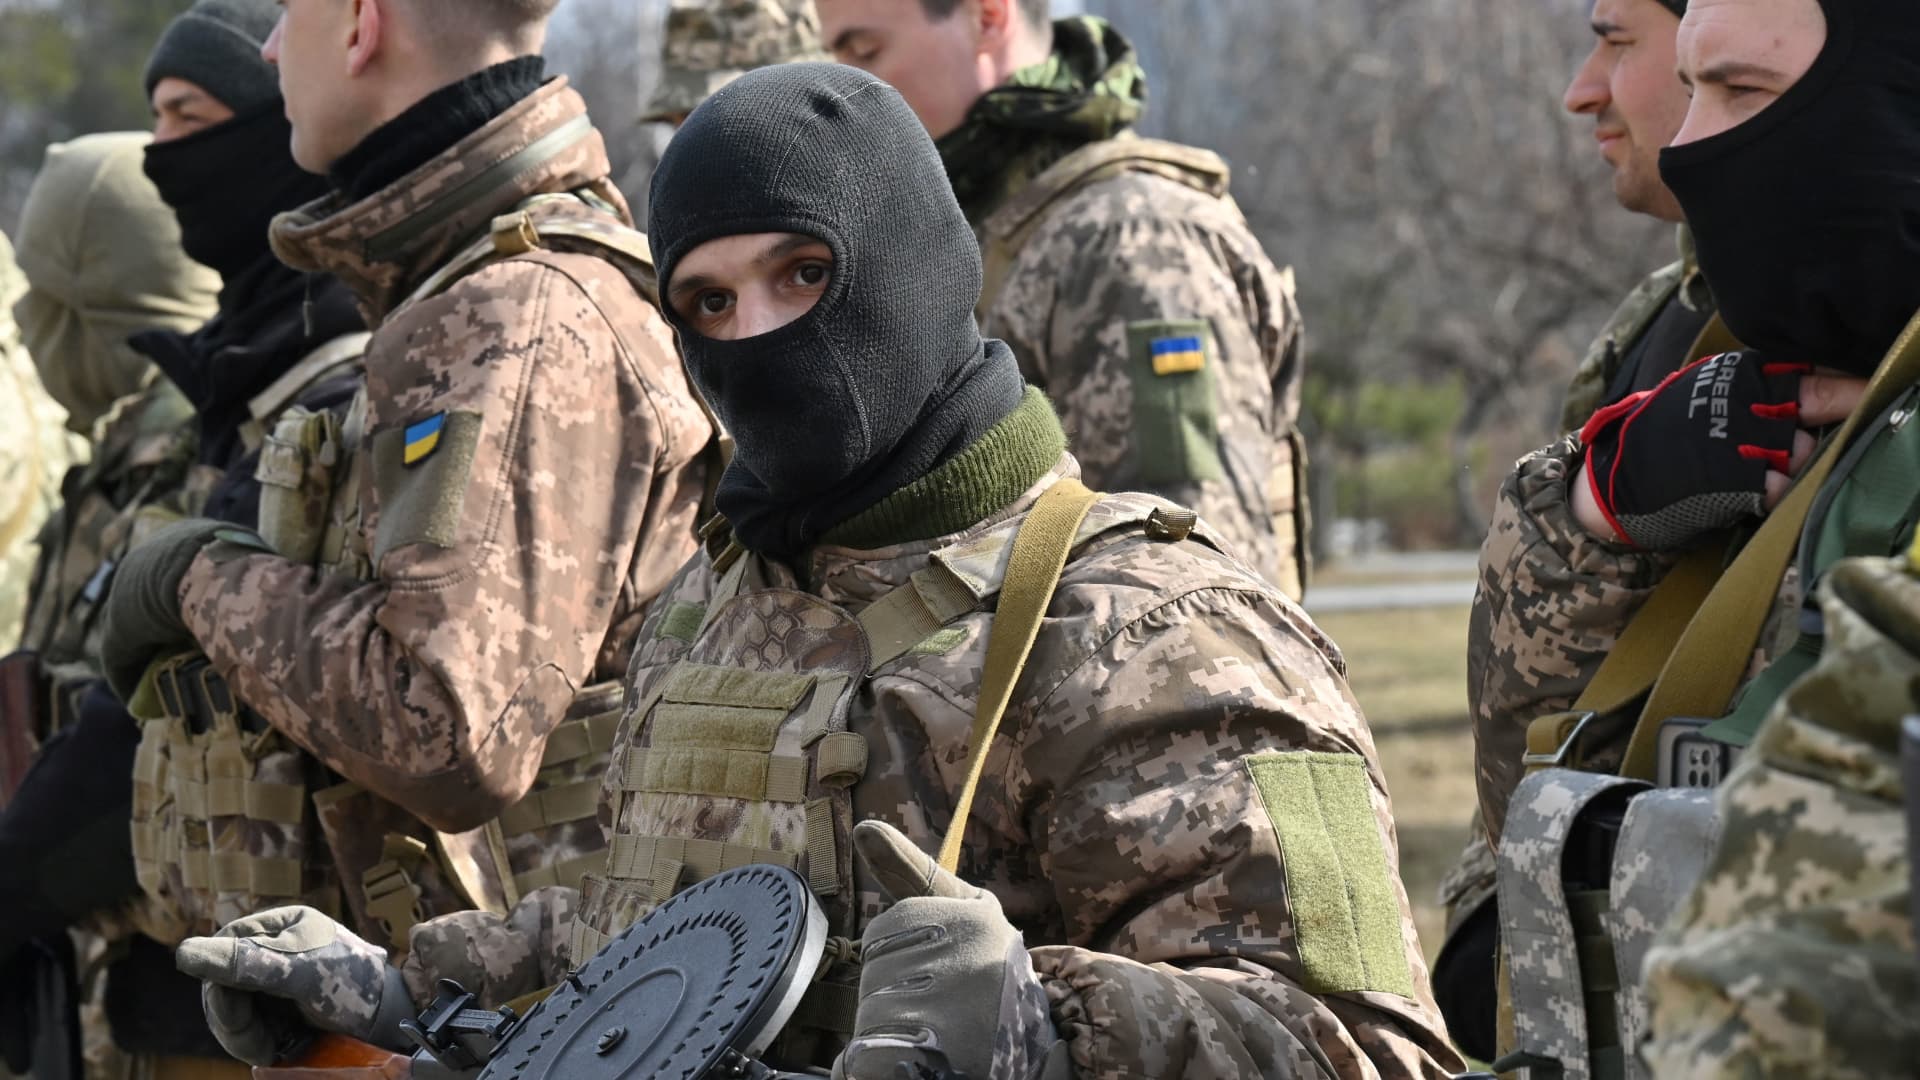 Members of the Ukrainian Territorial Defence Forces examine new armament, including NLAW anti-tank systems and other portable anti-tank grenade launchers, in Kyiv on March 9, 2022, amid the ongoing Russia's invasion of Ukraine.